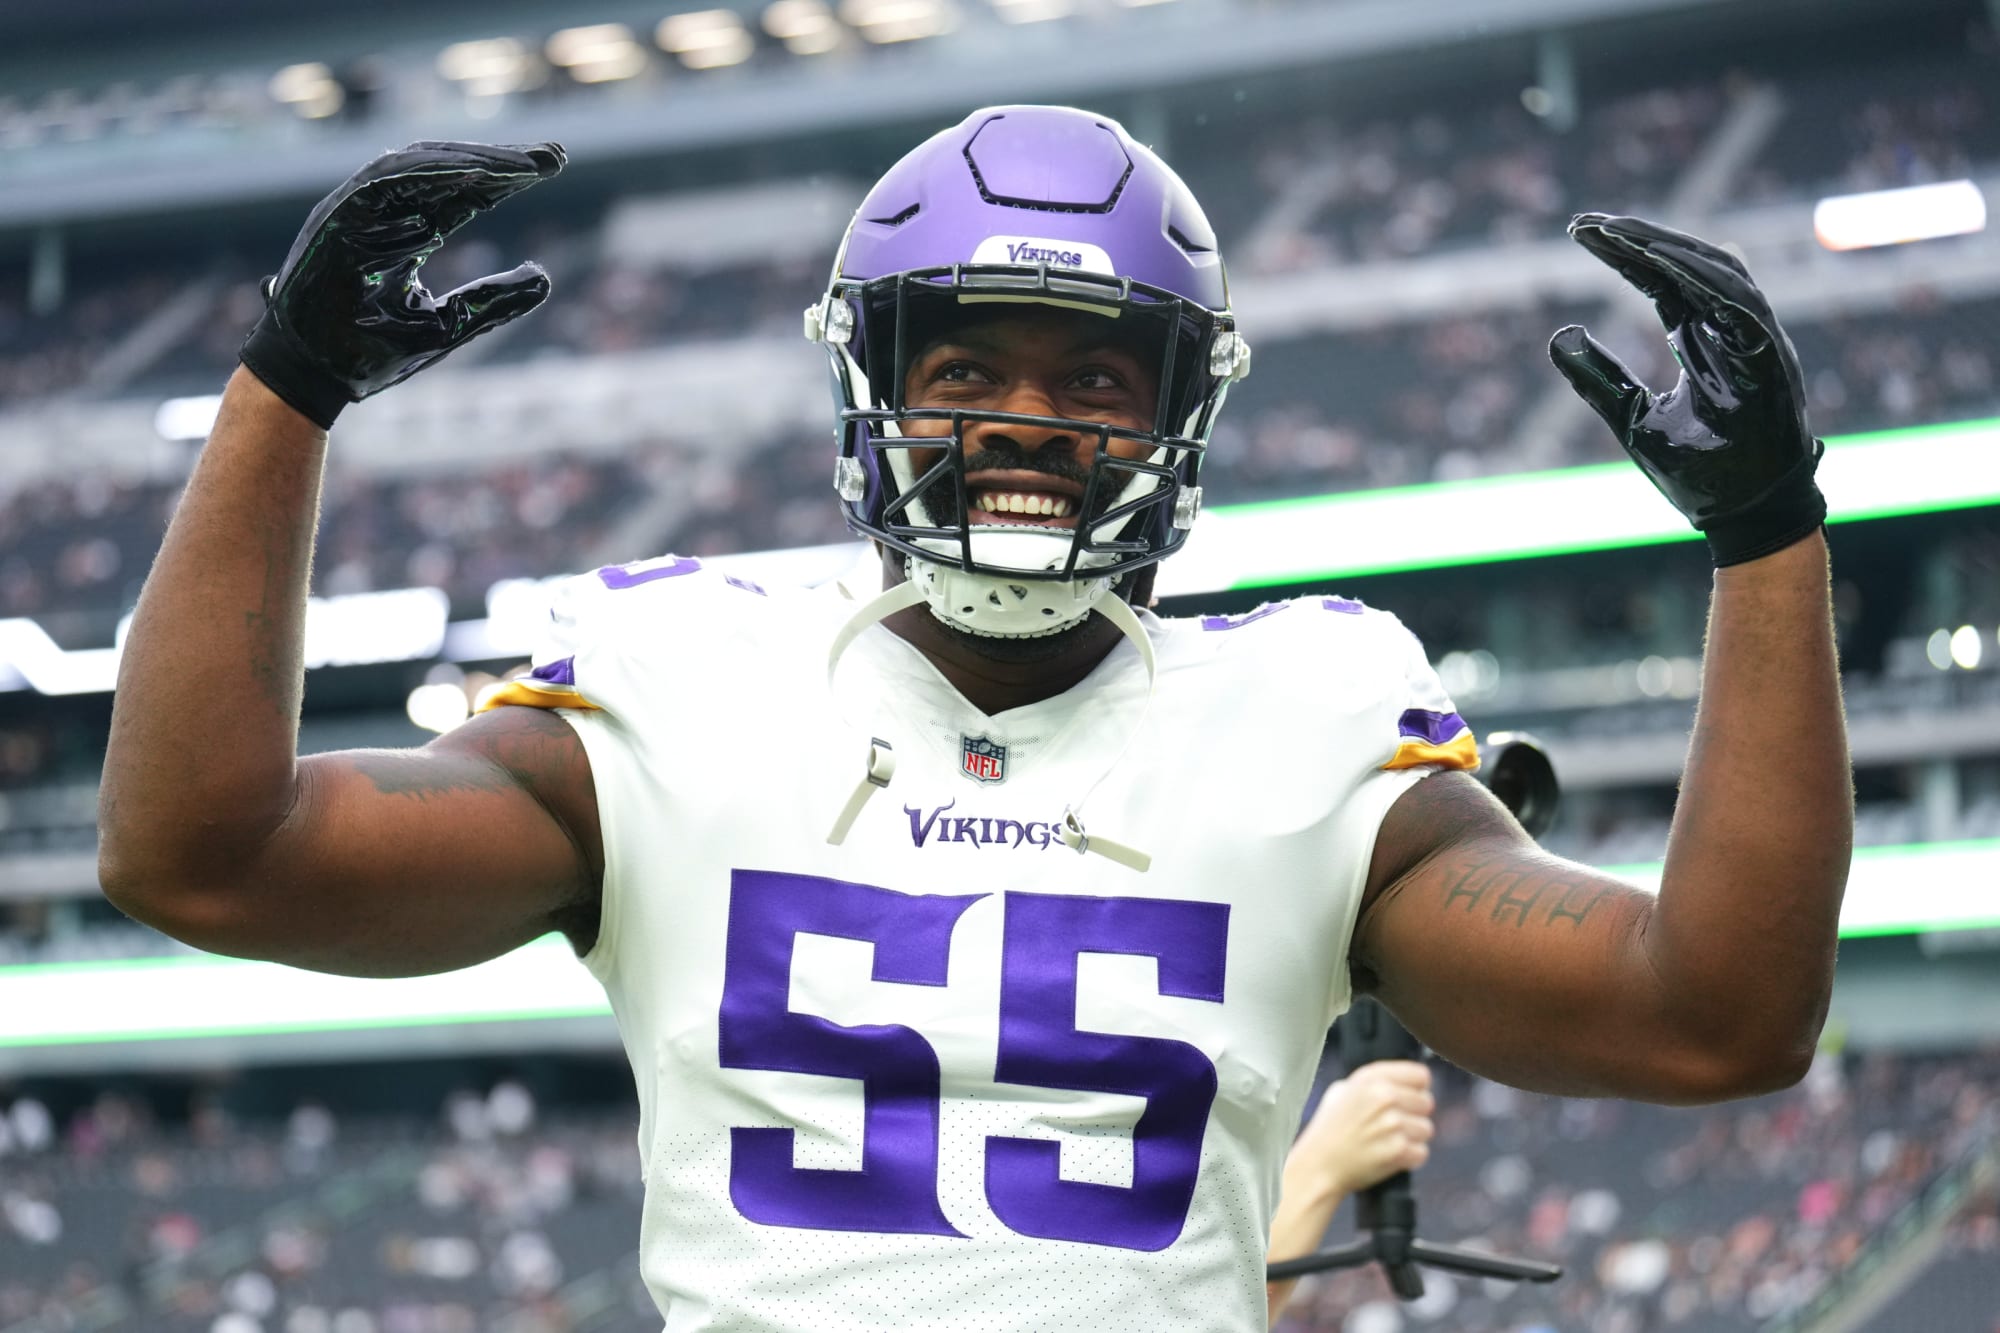 Best 2022 NFL offseason moves that will put the Vikings over the top